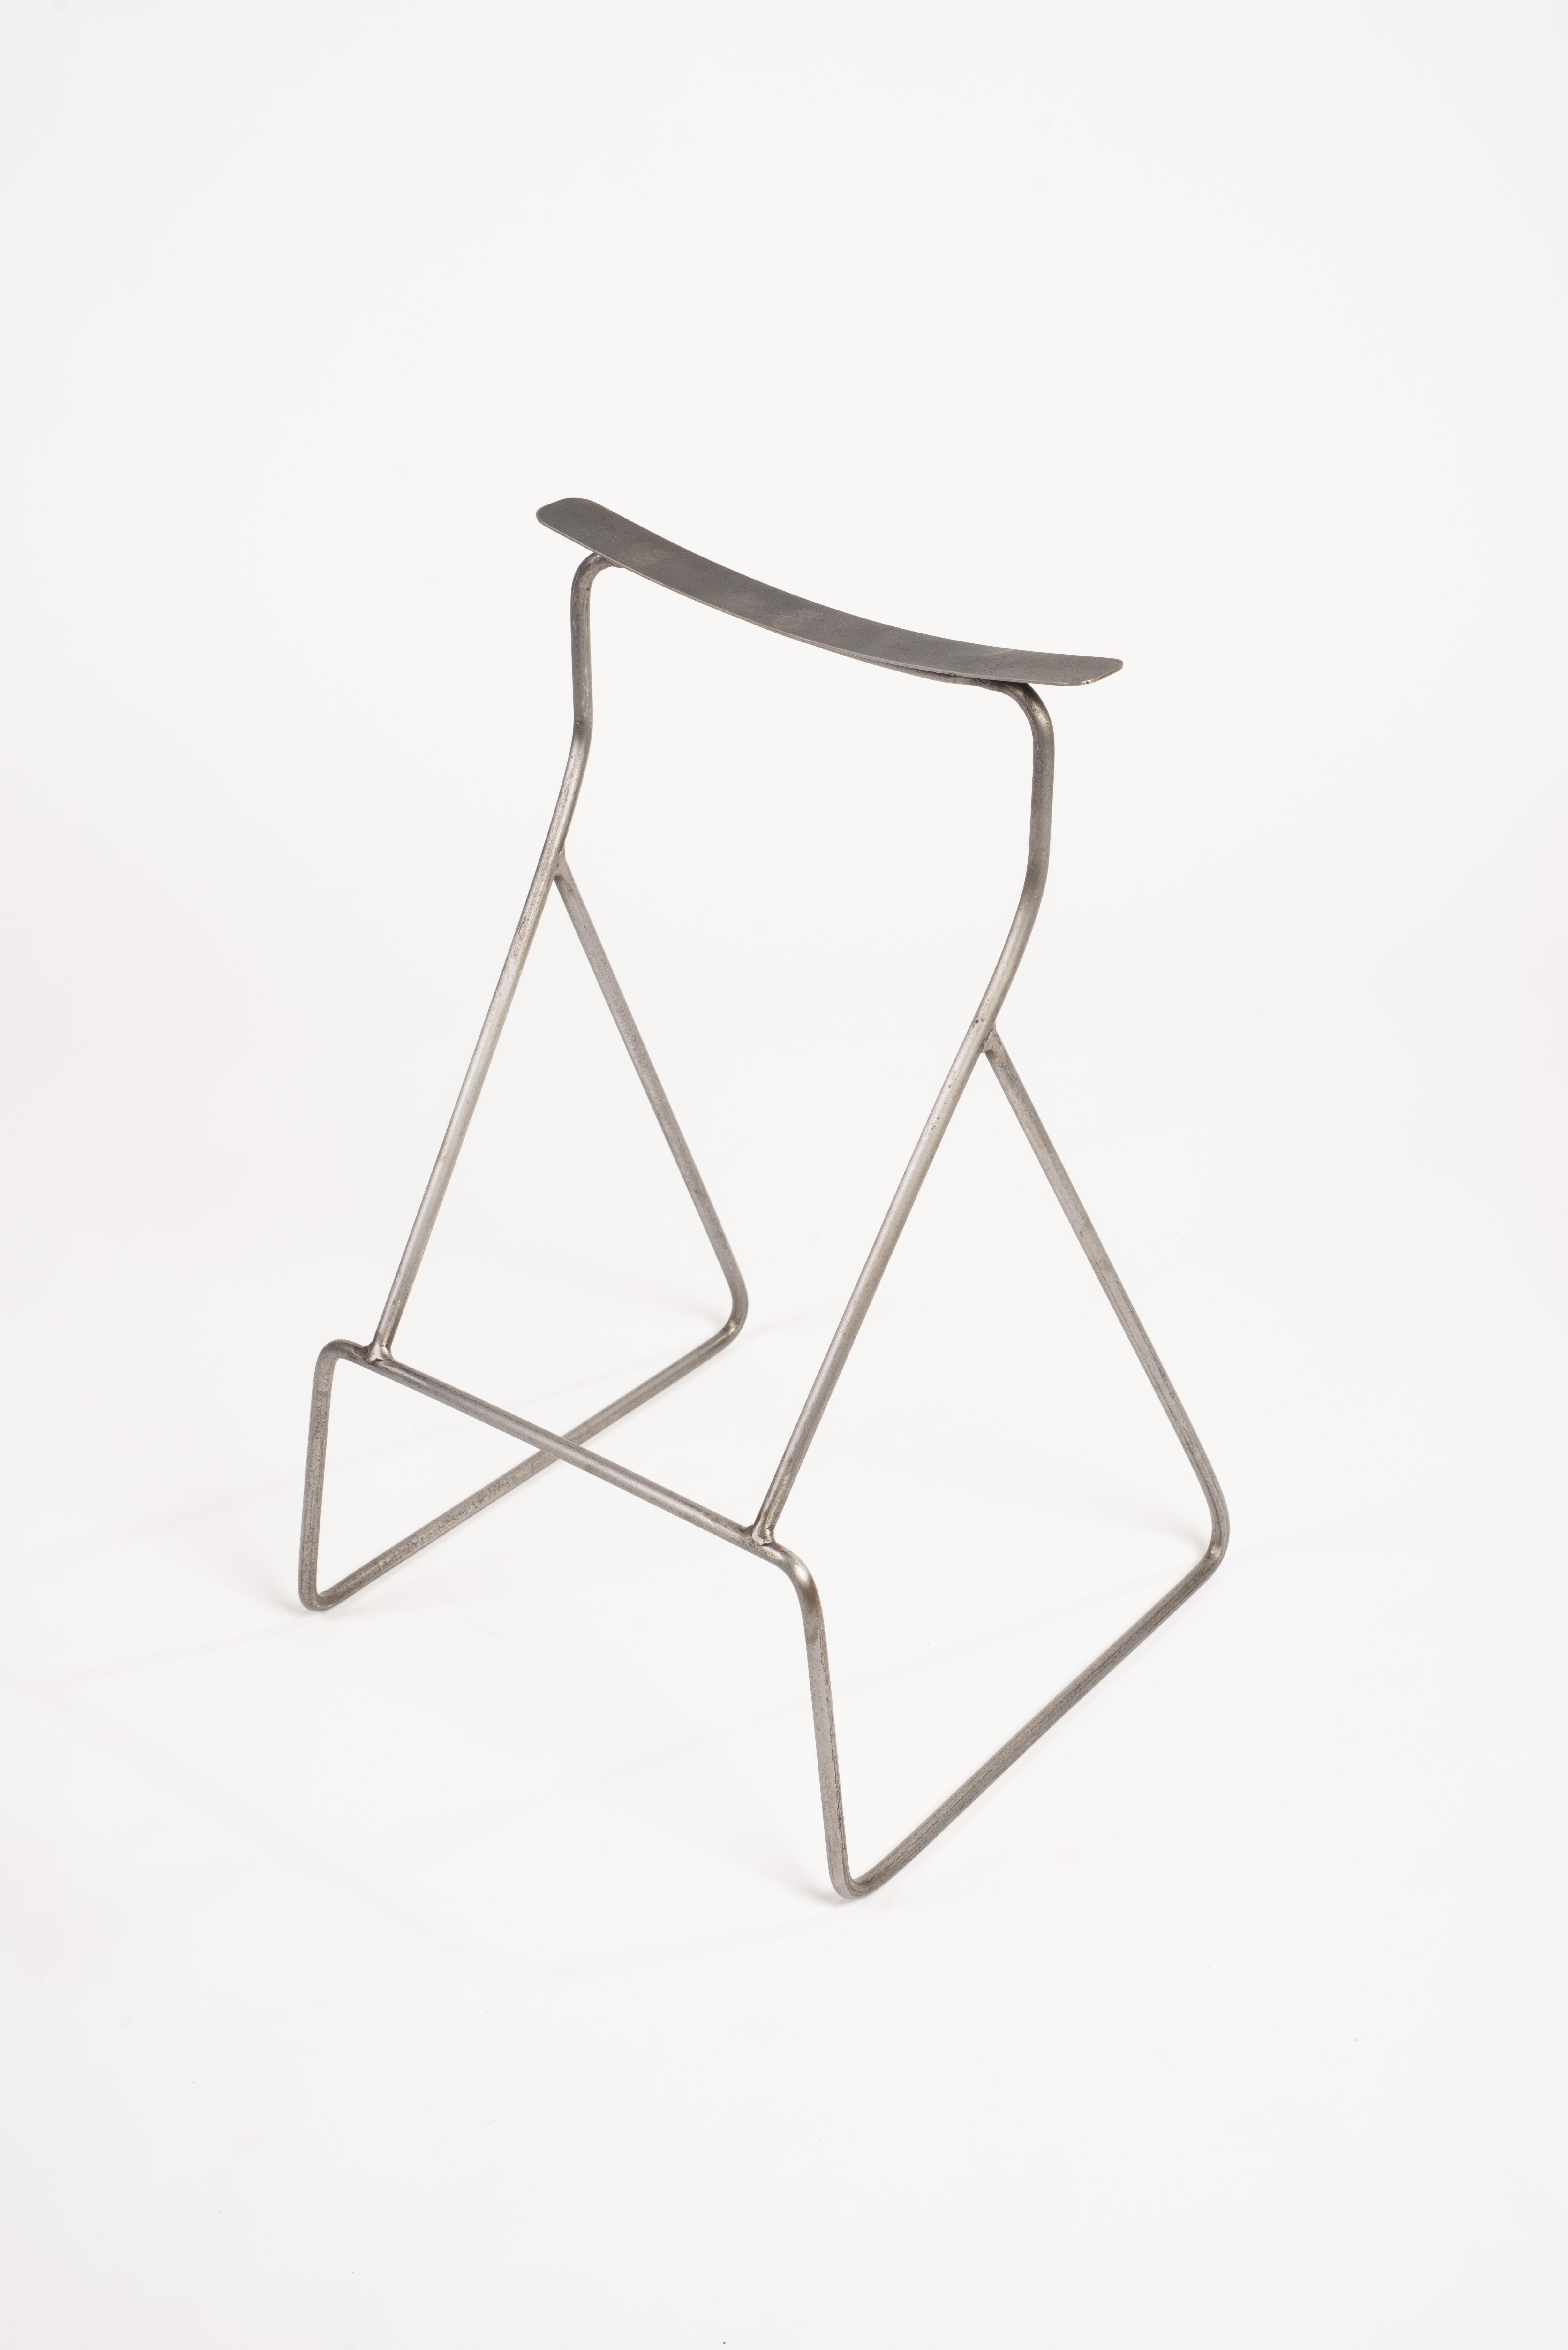 Modern One Line Stool by Neil Nenner For Sale